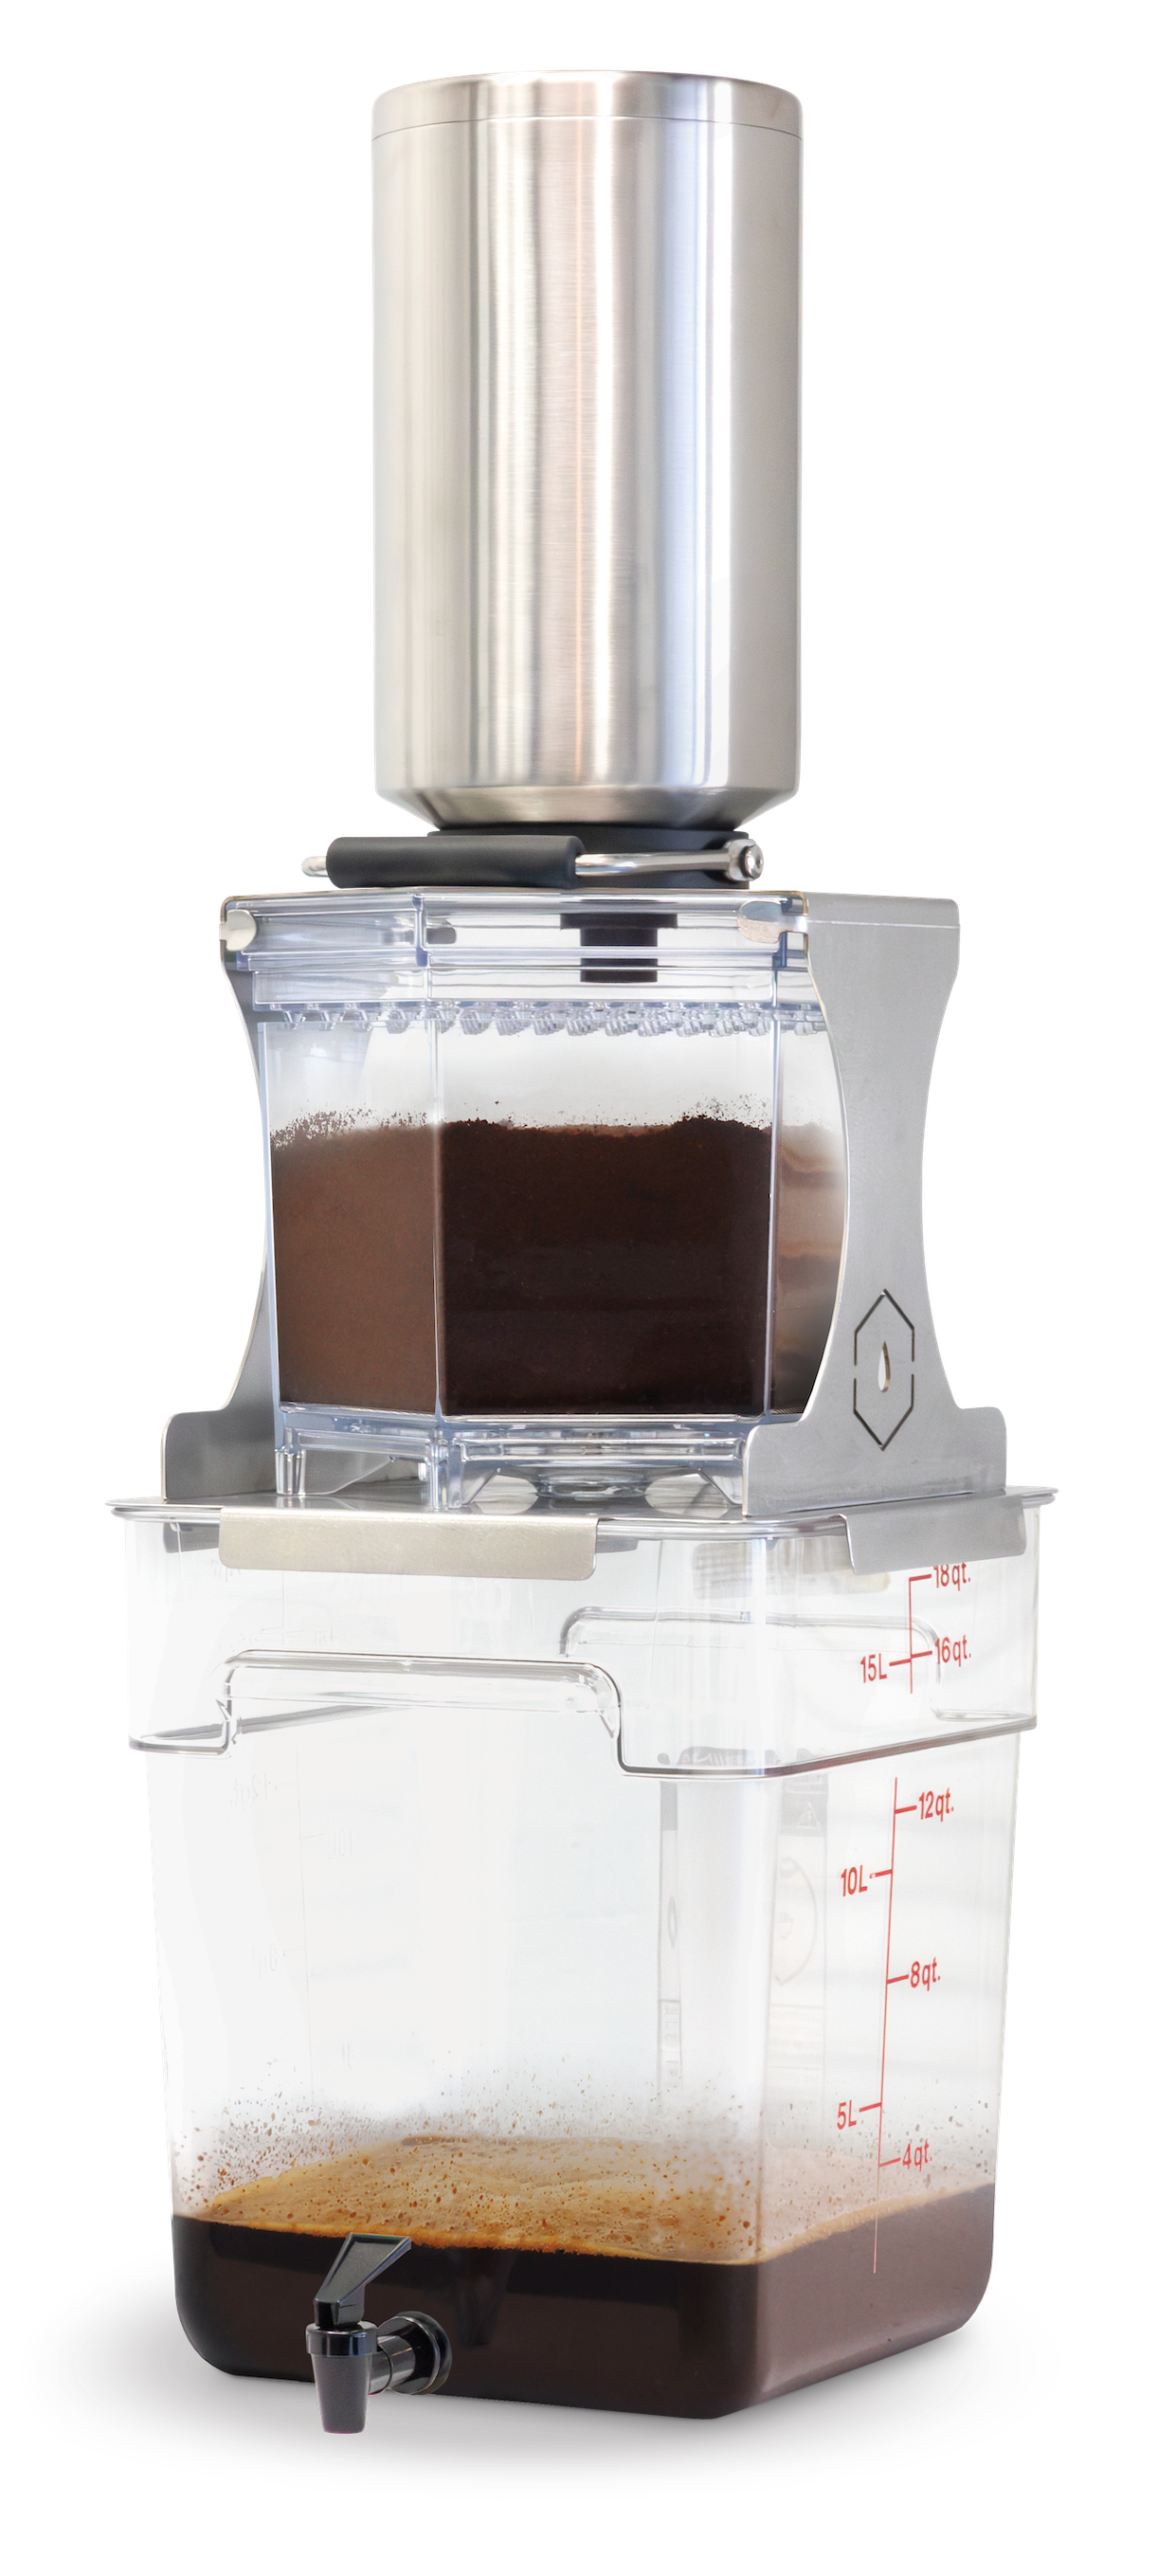 Torr Hive Cafe concentrate brewer